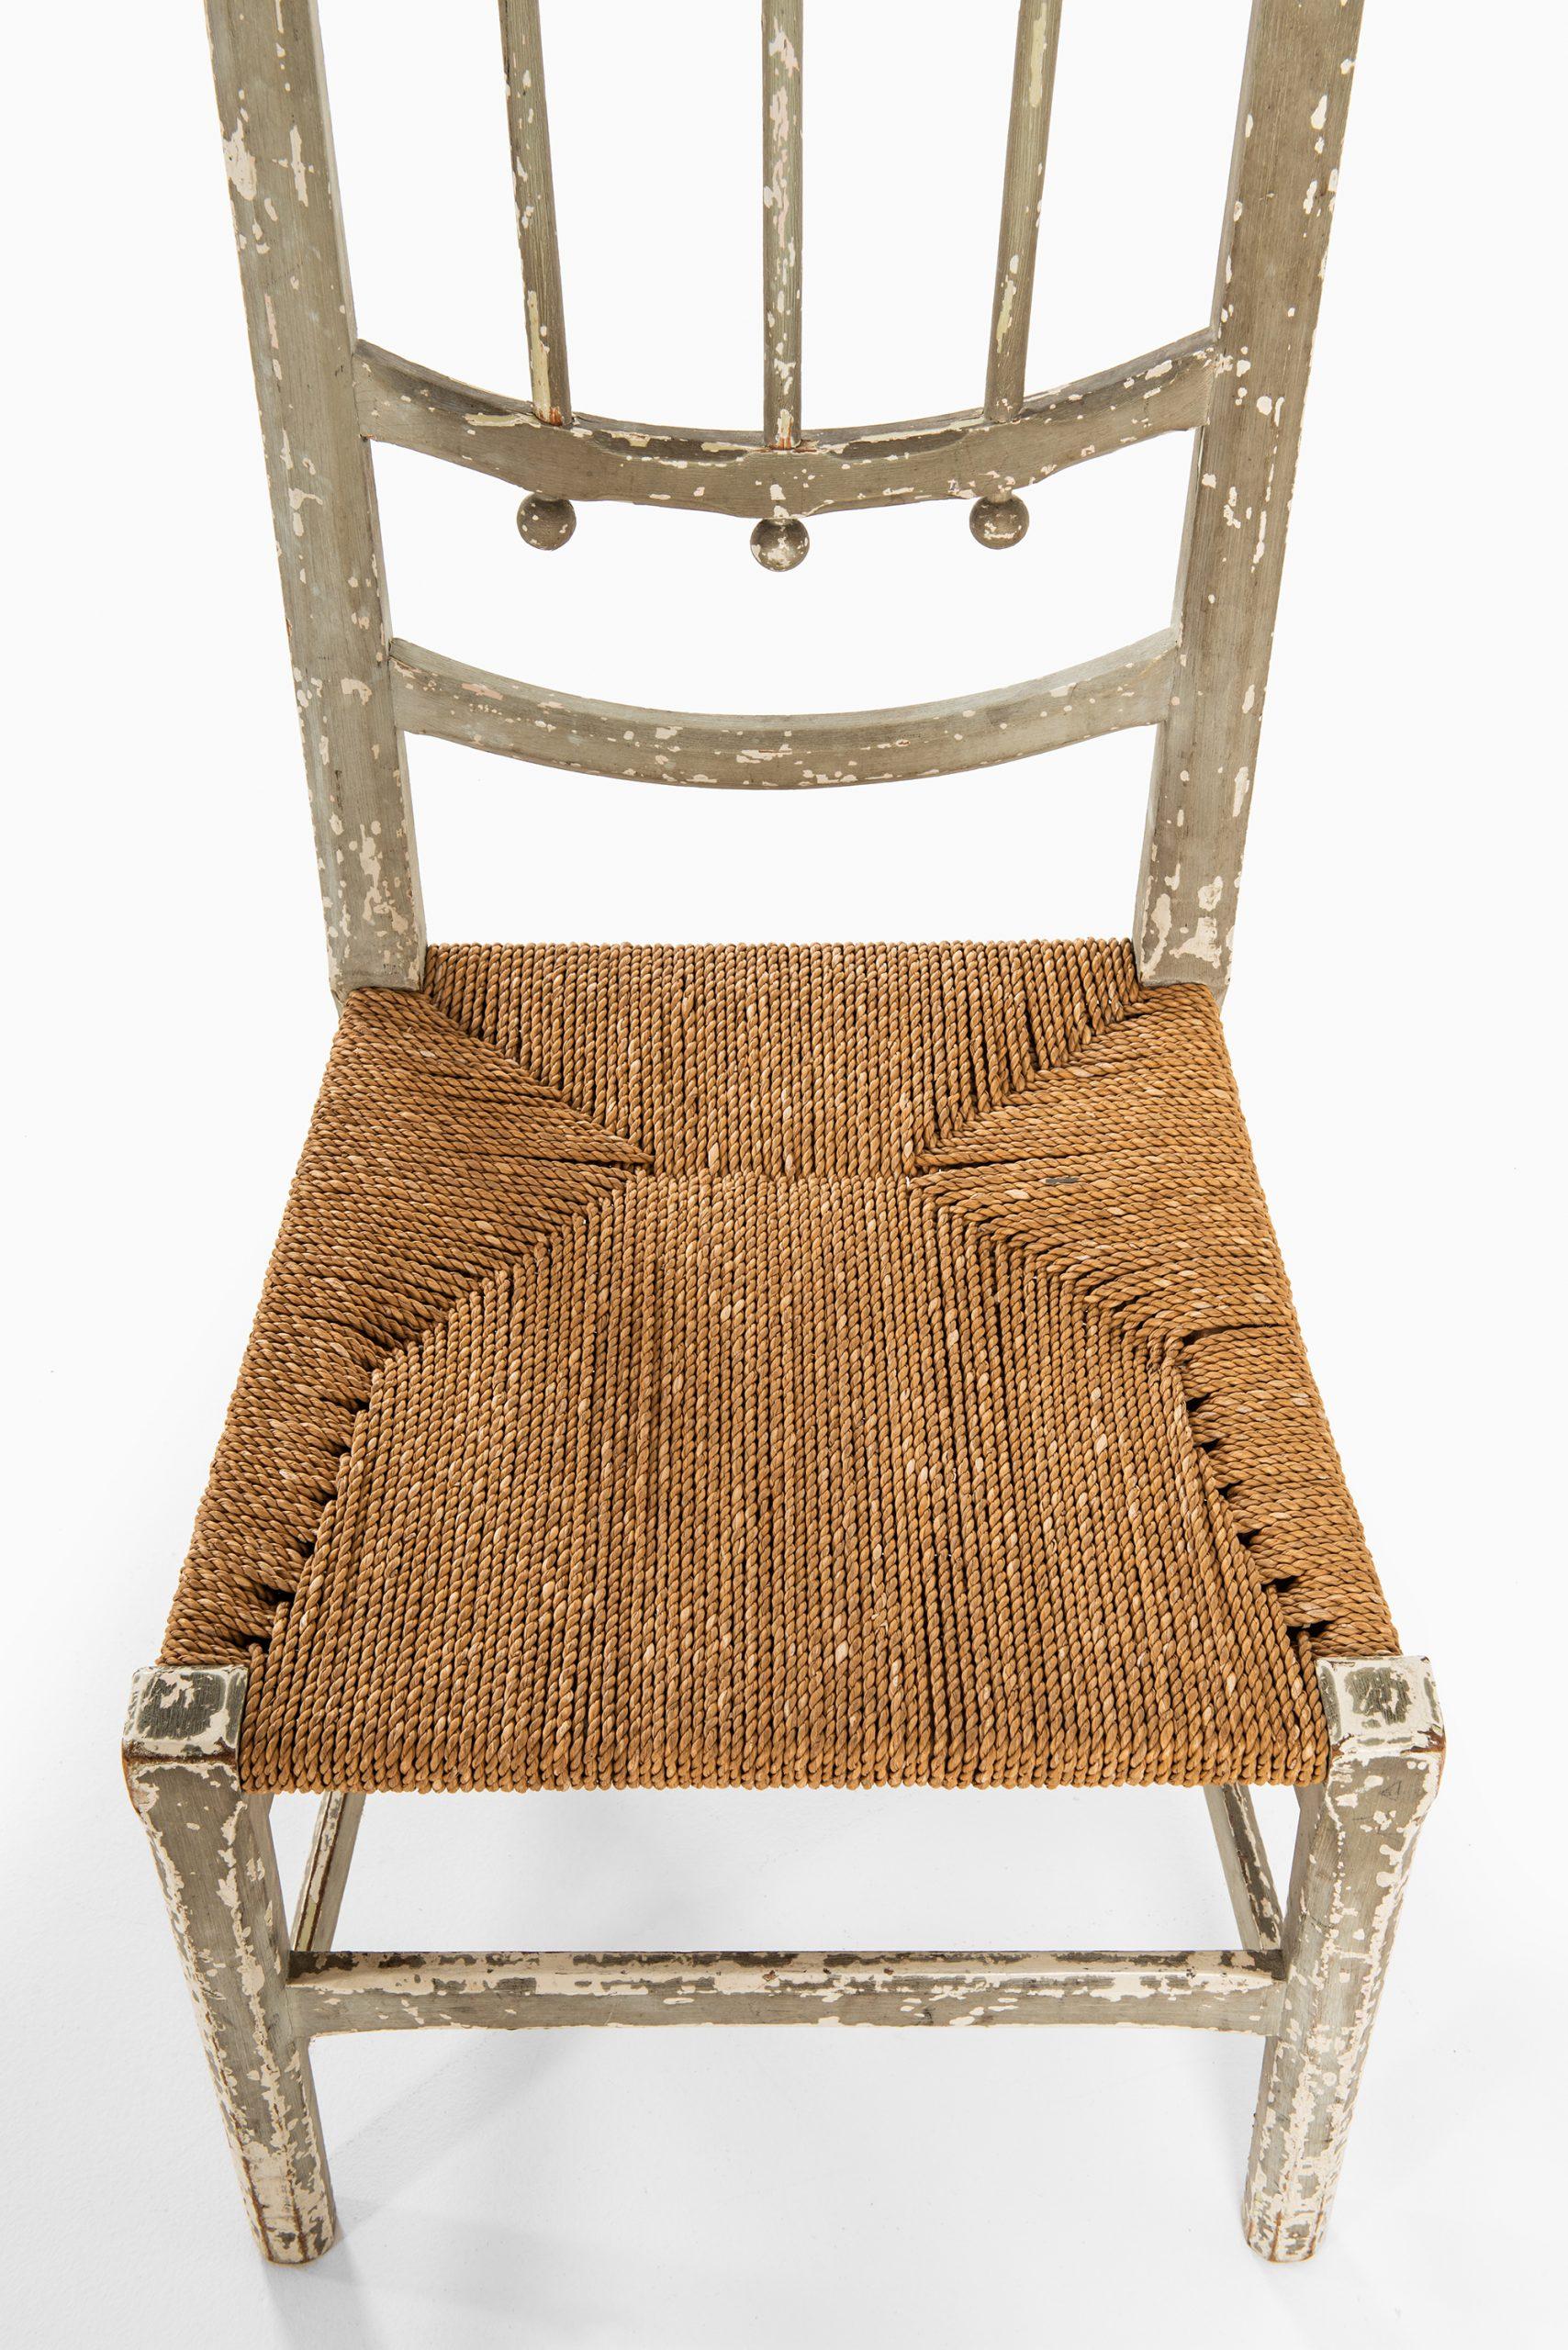 Mid-20th Century Side Chair Probably Produced in Sweden For Sale